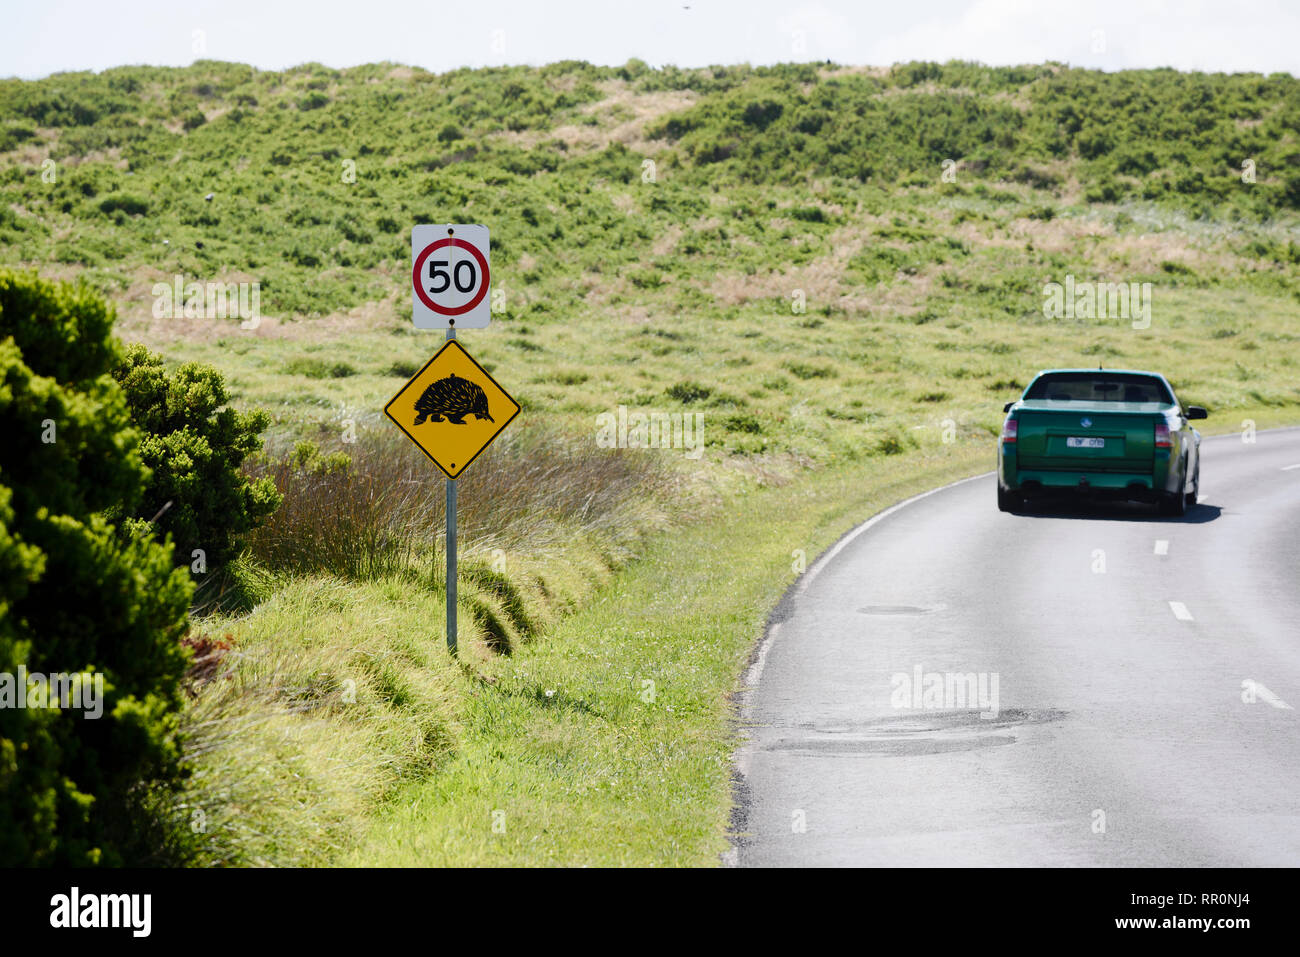 Echidna and speed road sign on Australian road with ute driving past, Port Fairy Australia Stock Photo